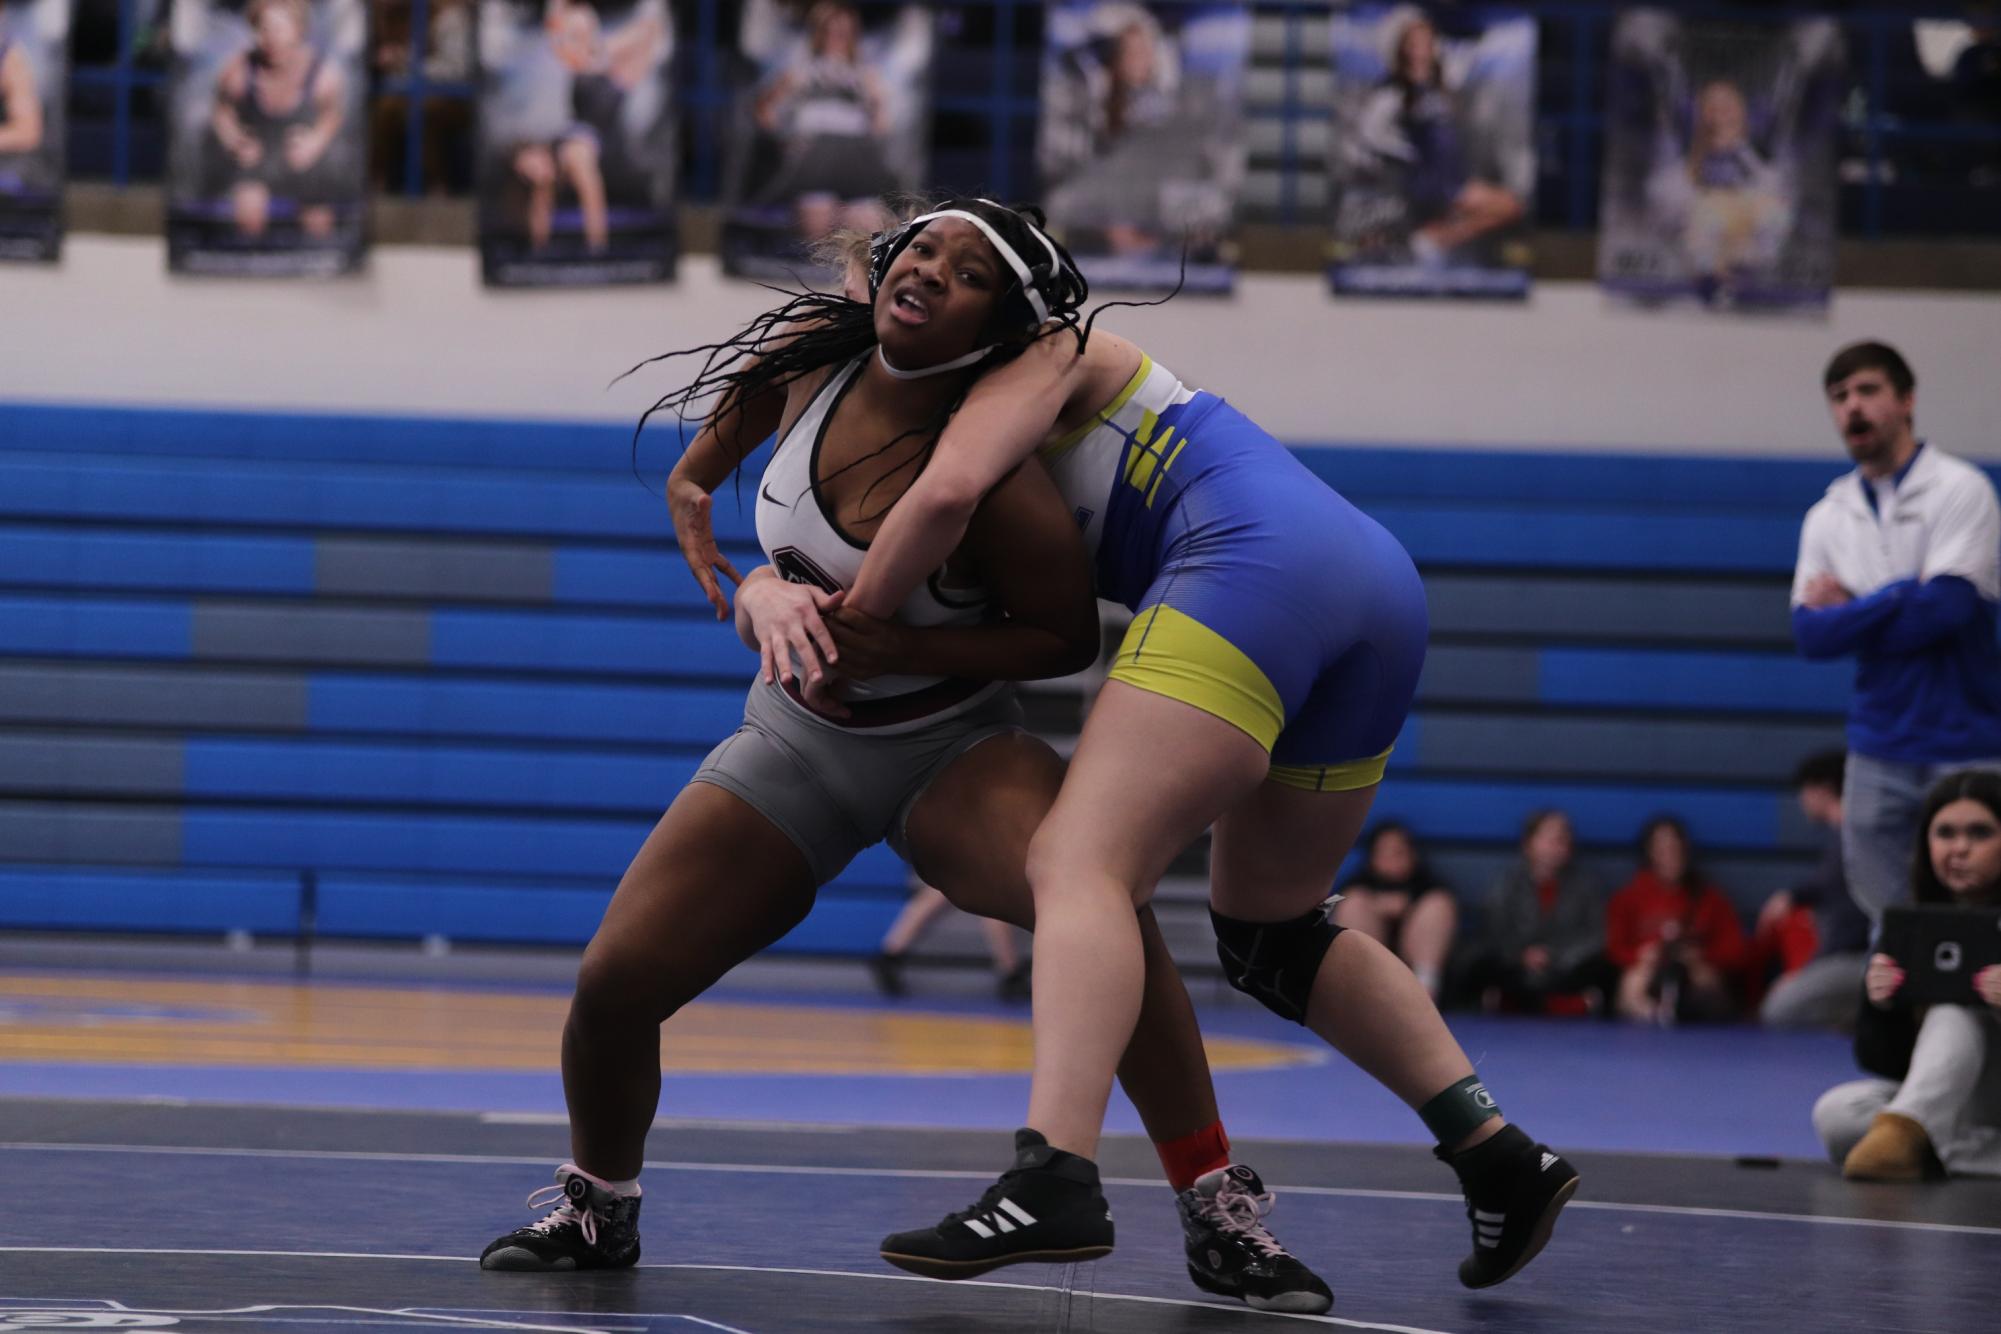 In an attempt to hold her ground, sophomore Jacida Kirk pushes her opponent off of her to get out of her grasp. The tournament took place at Washington High School on Jan. 19.